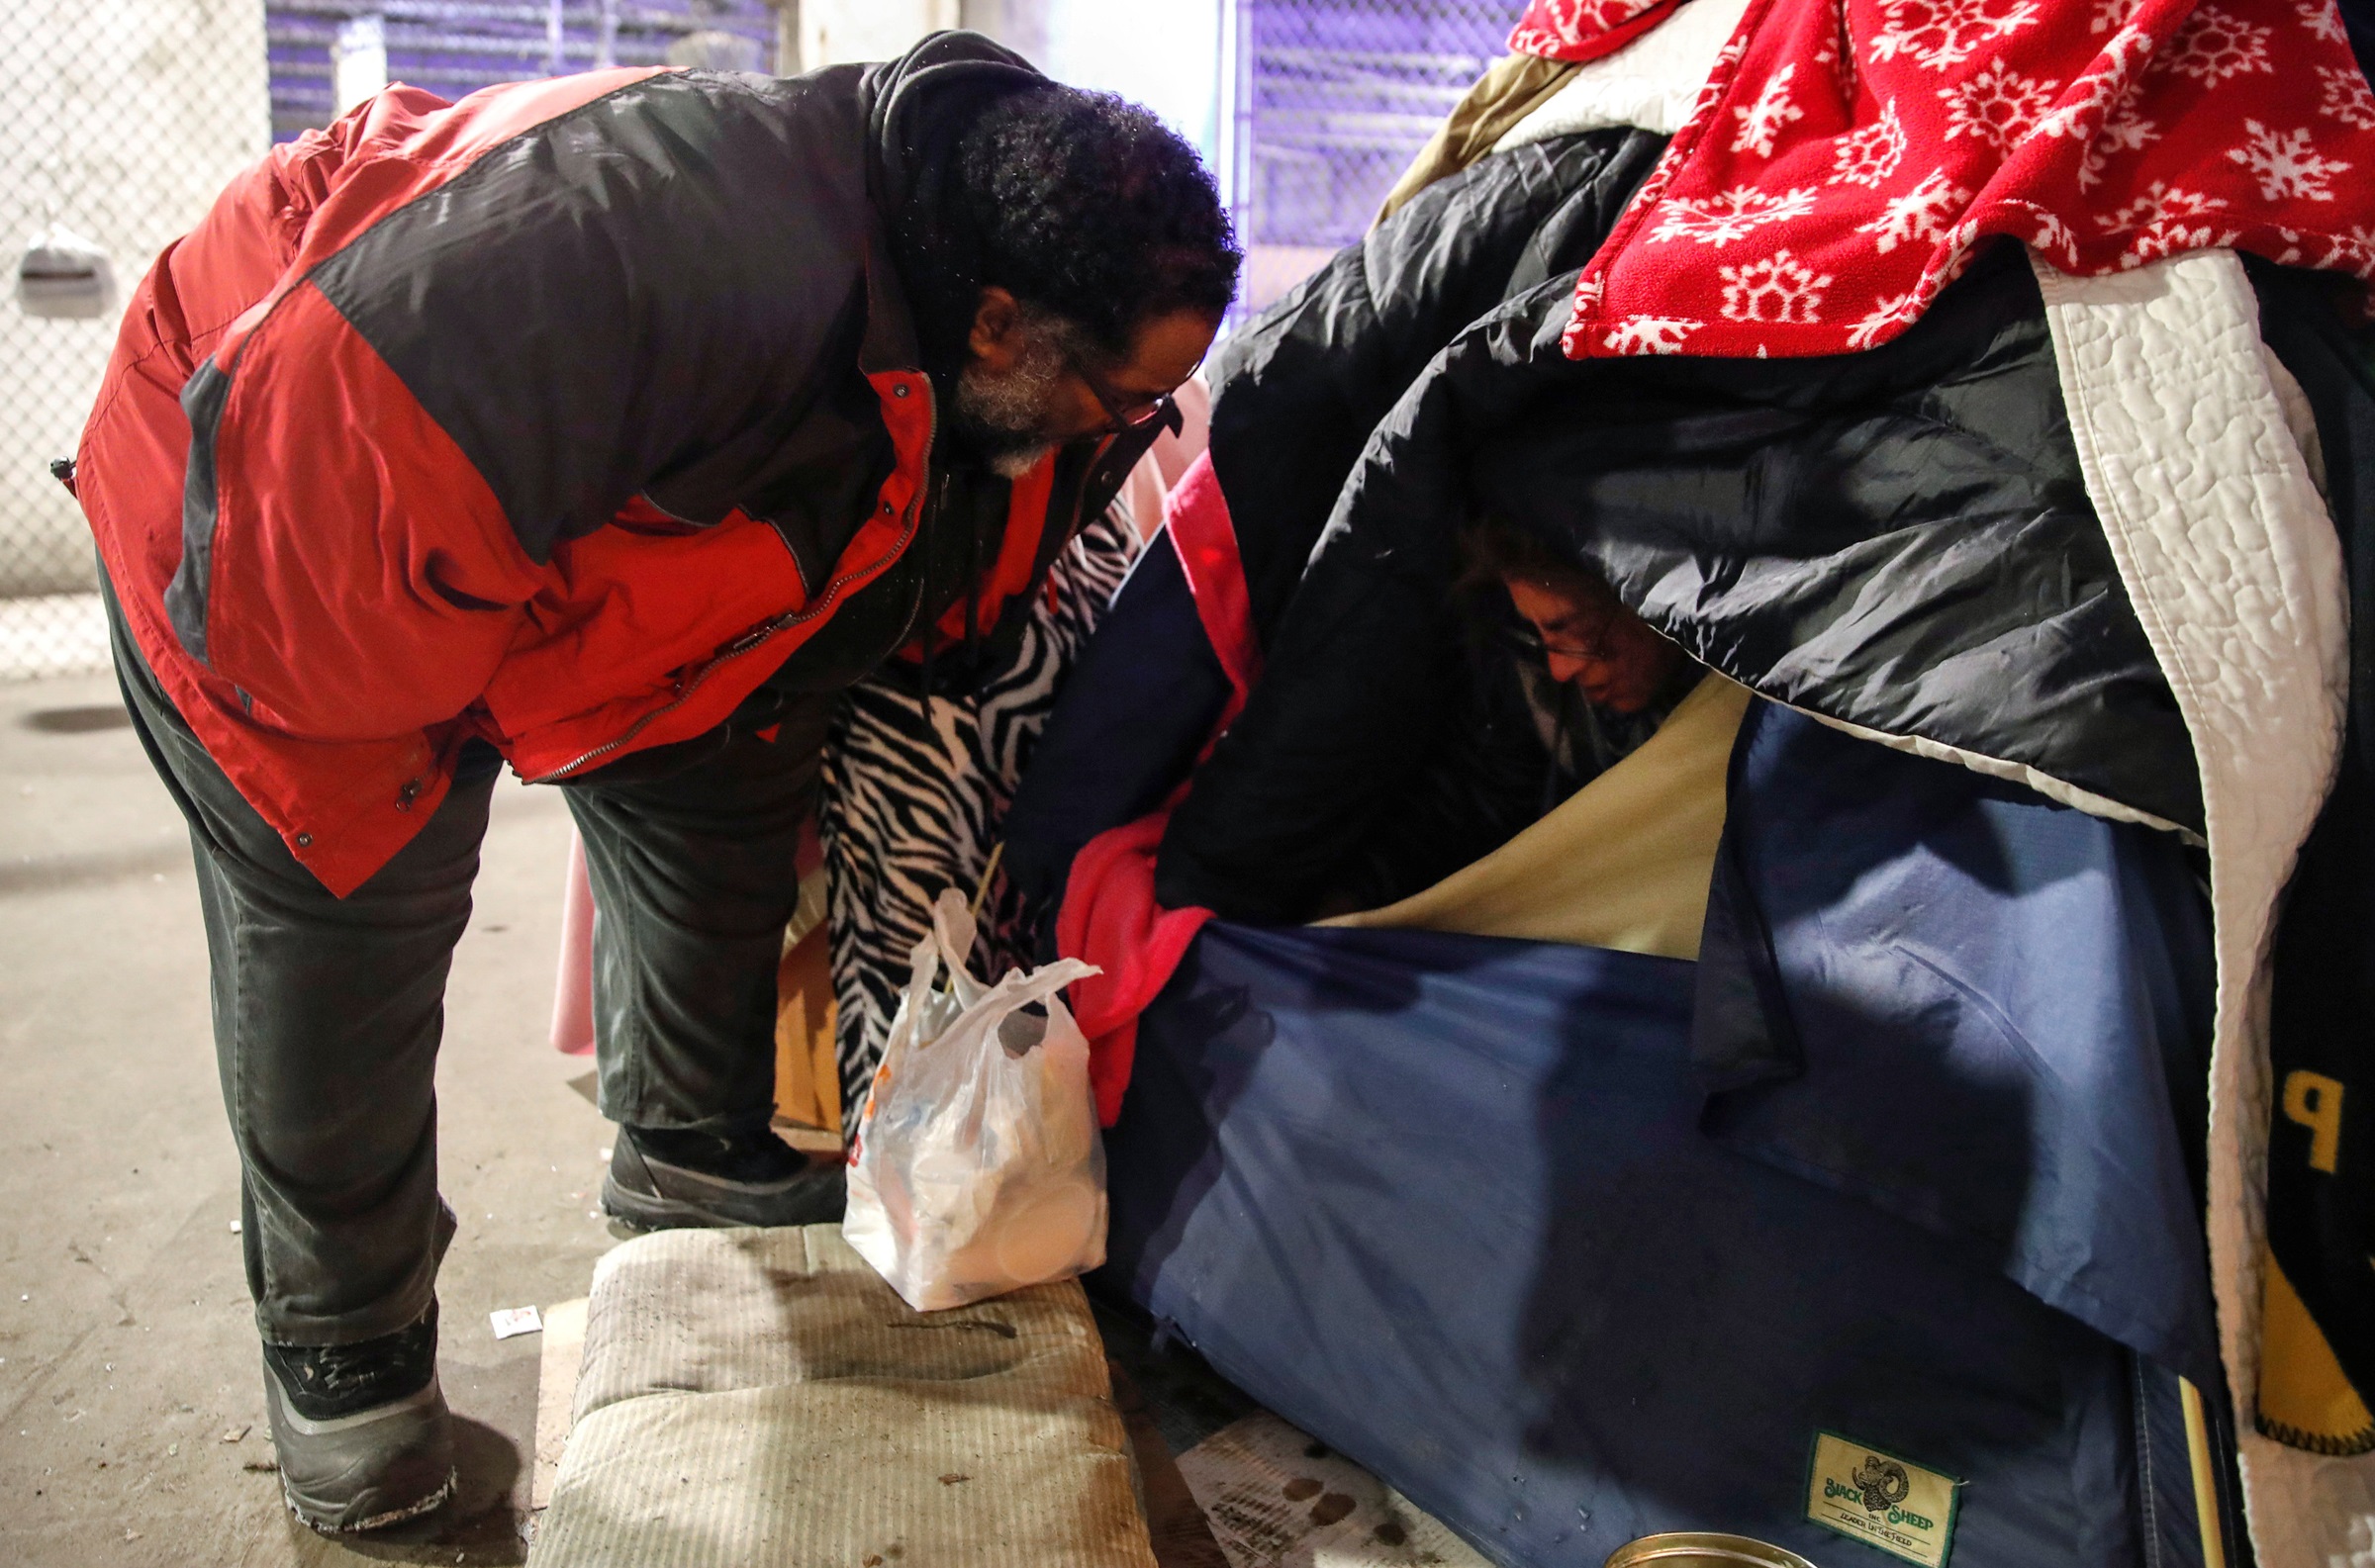 Lawmakers help homeless shelters in COVID19 emergency